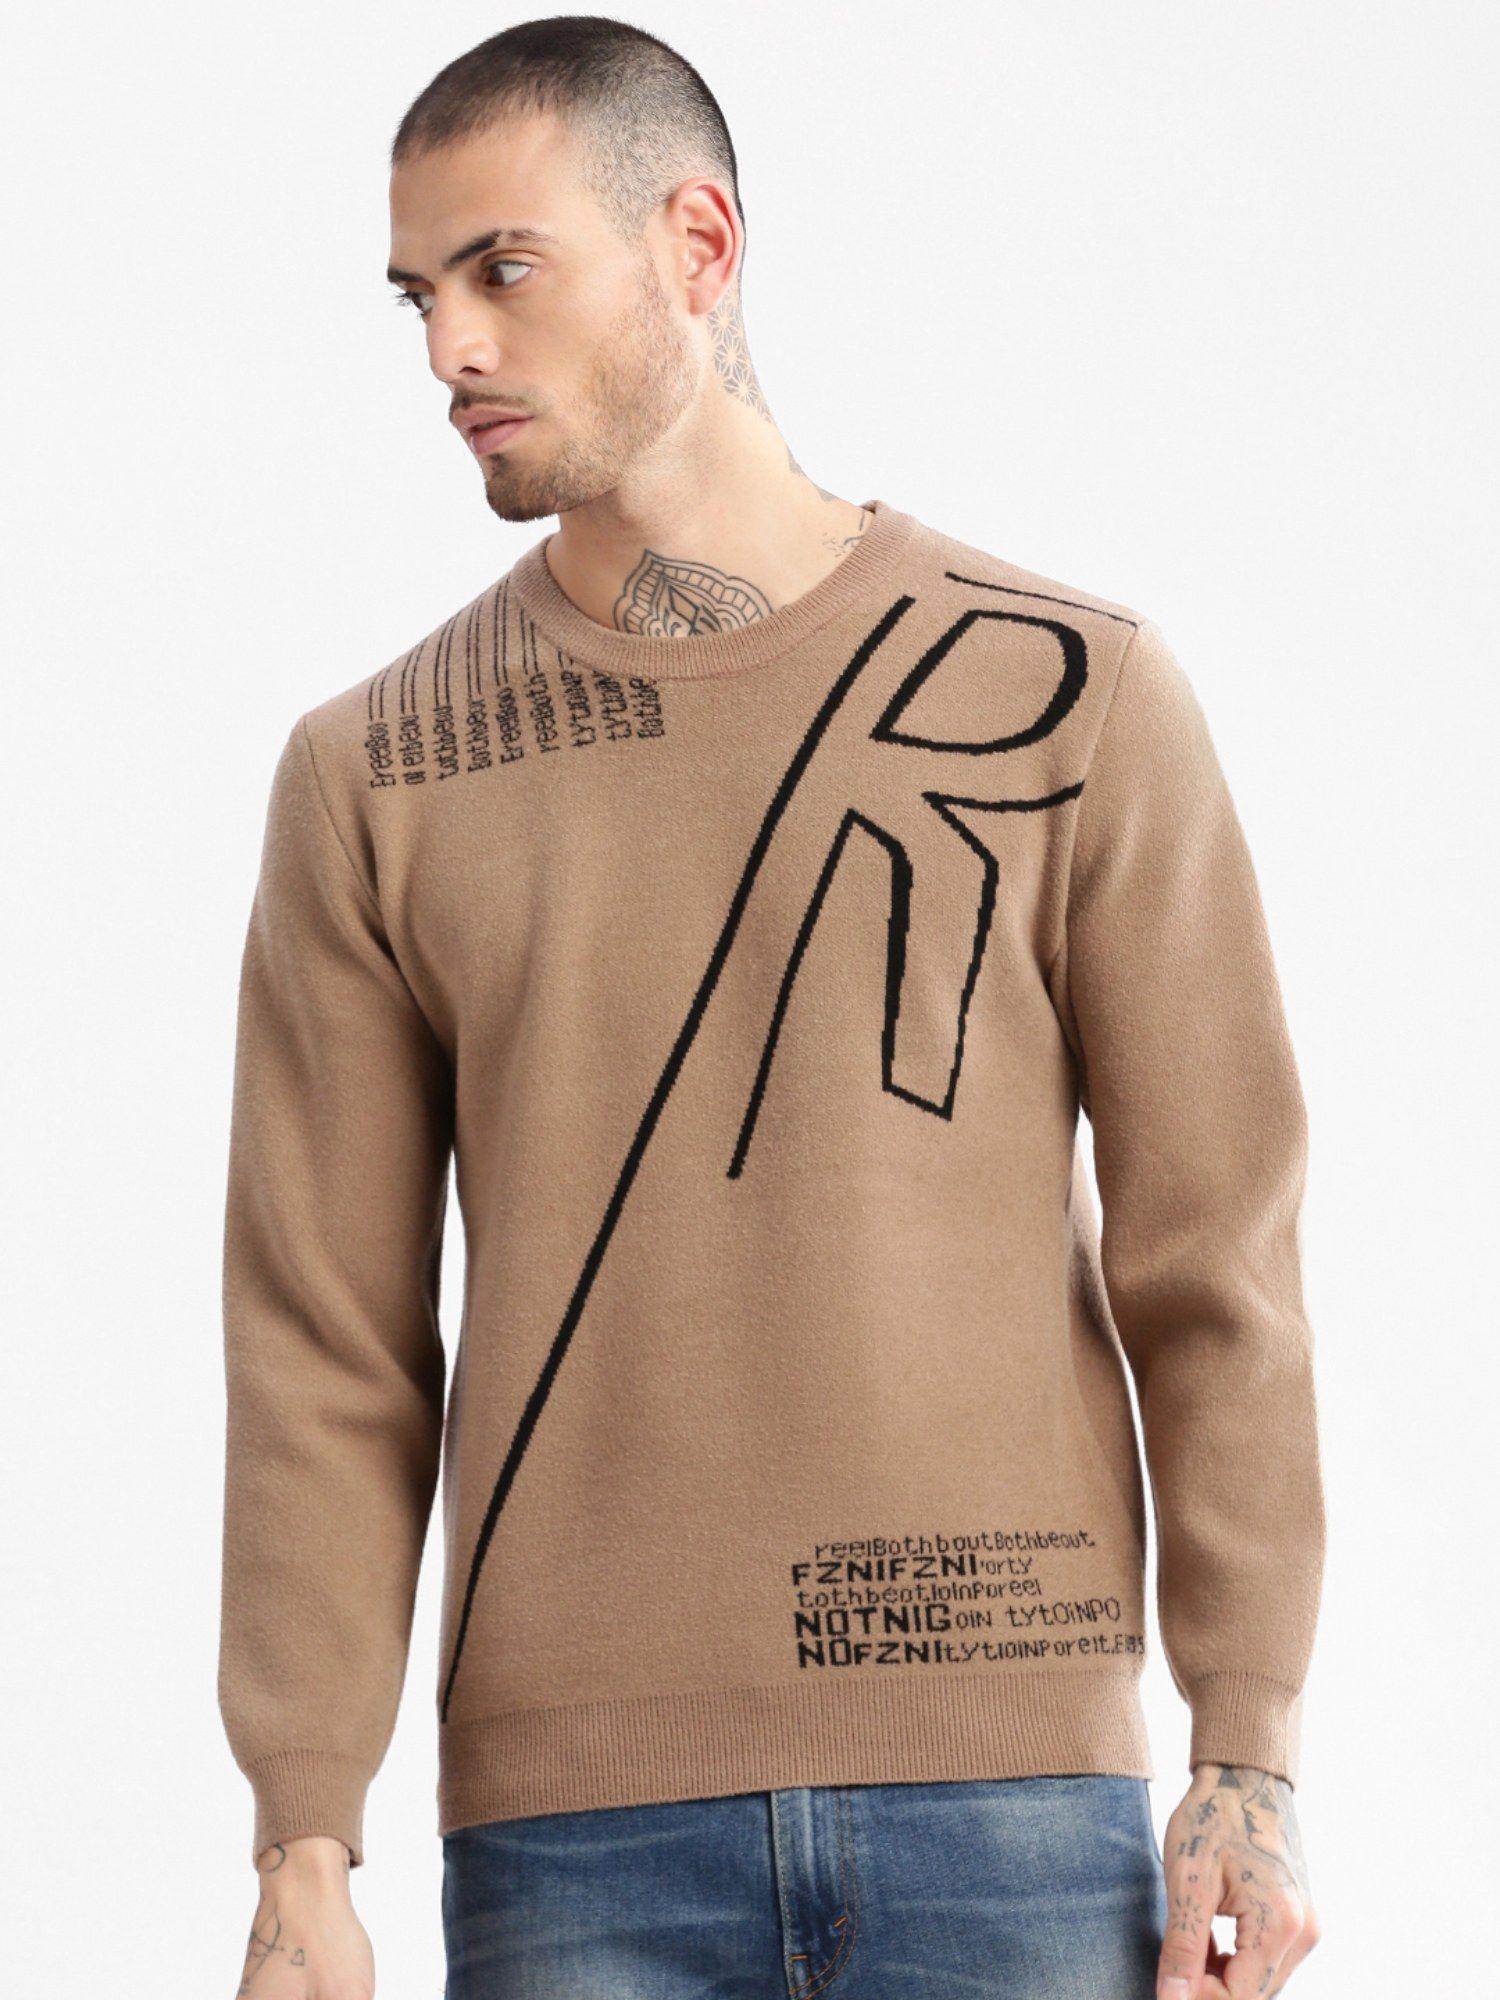 mens-round-neck-long-sleeves-self-design-brown-pullover